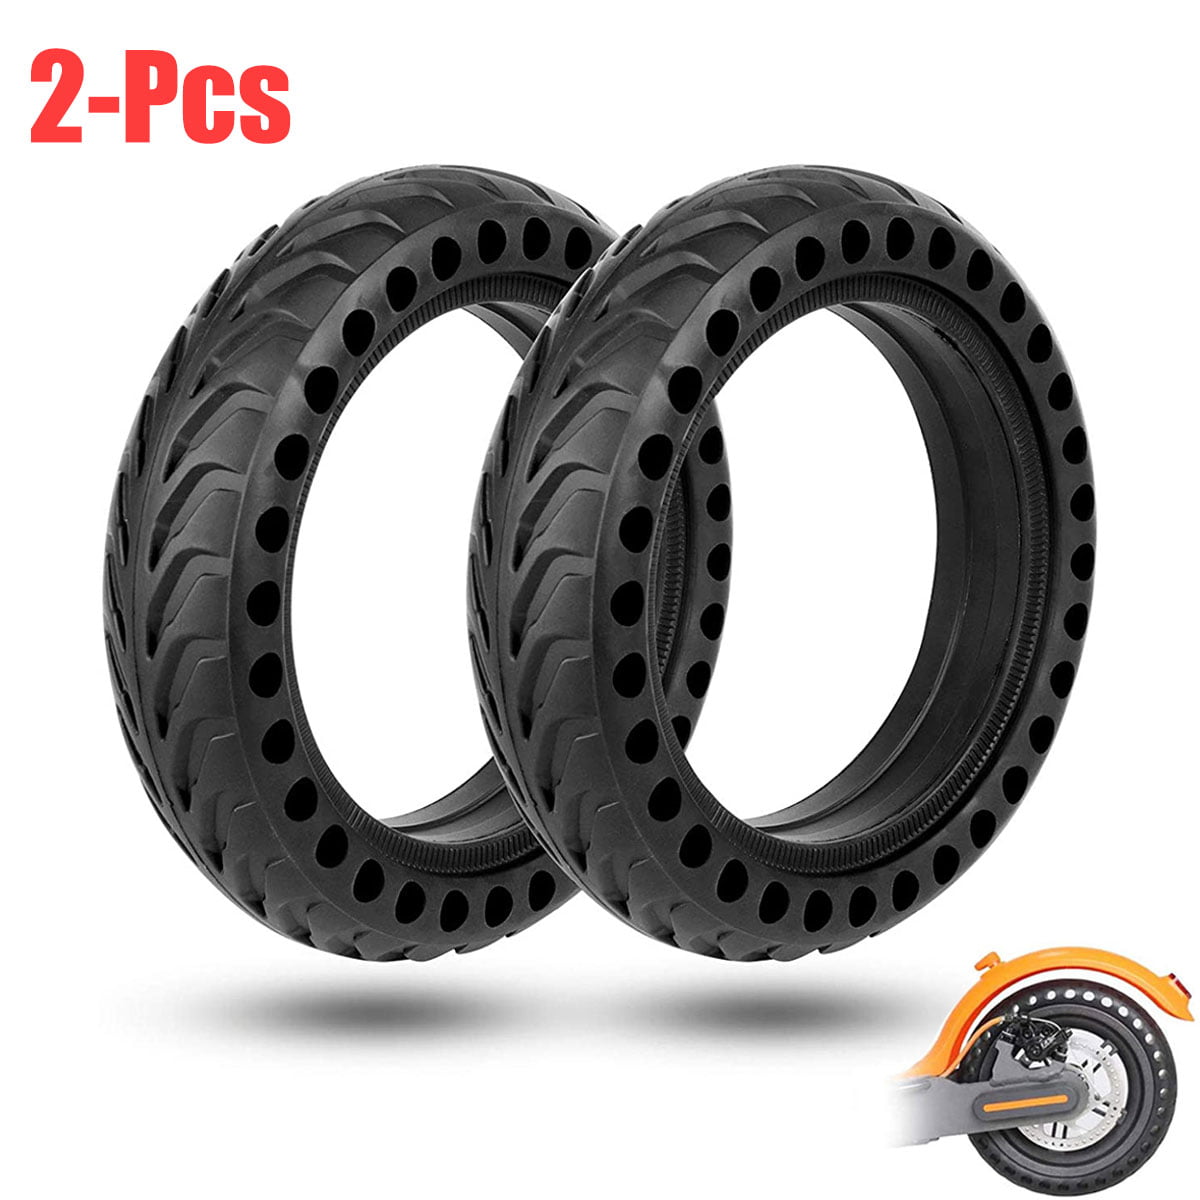 8.5" Damping Solid Tire Wheel Explosion-Proof for Xiaomi M365 Electric Scooter 